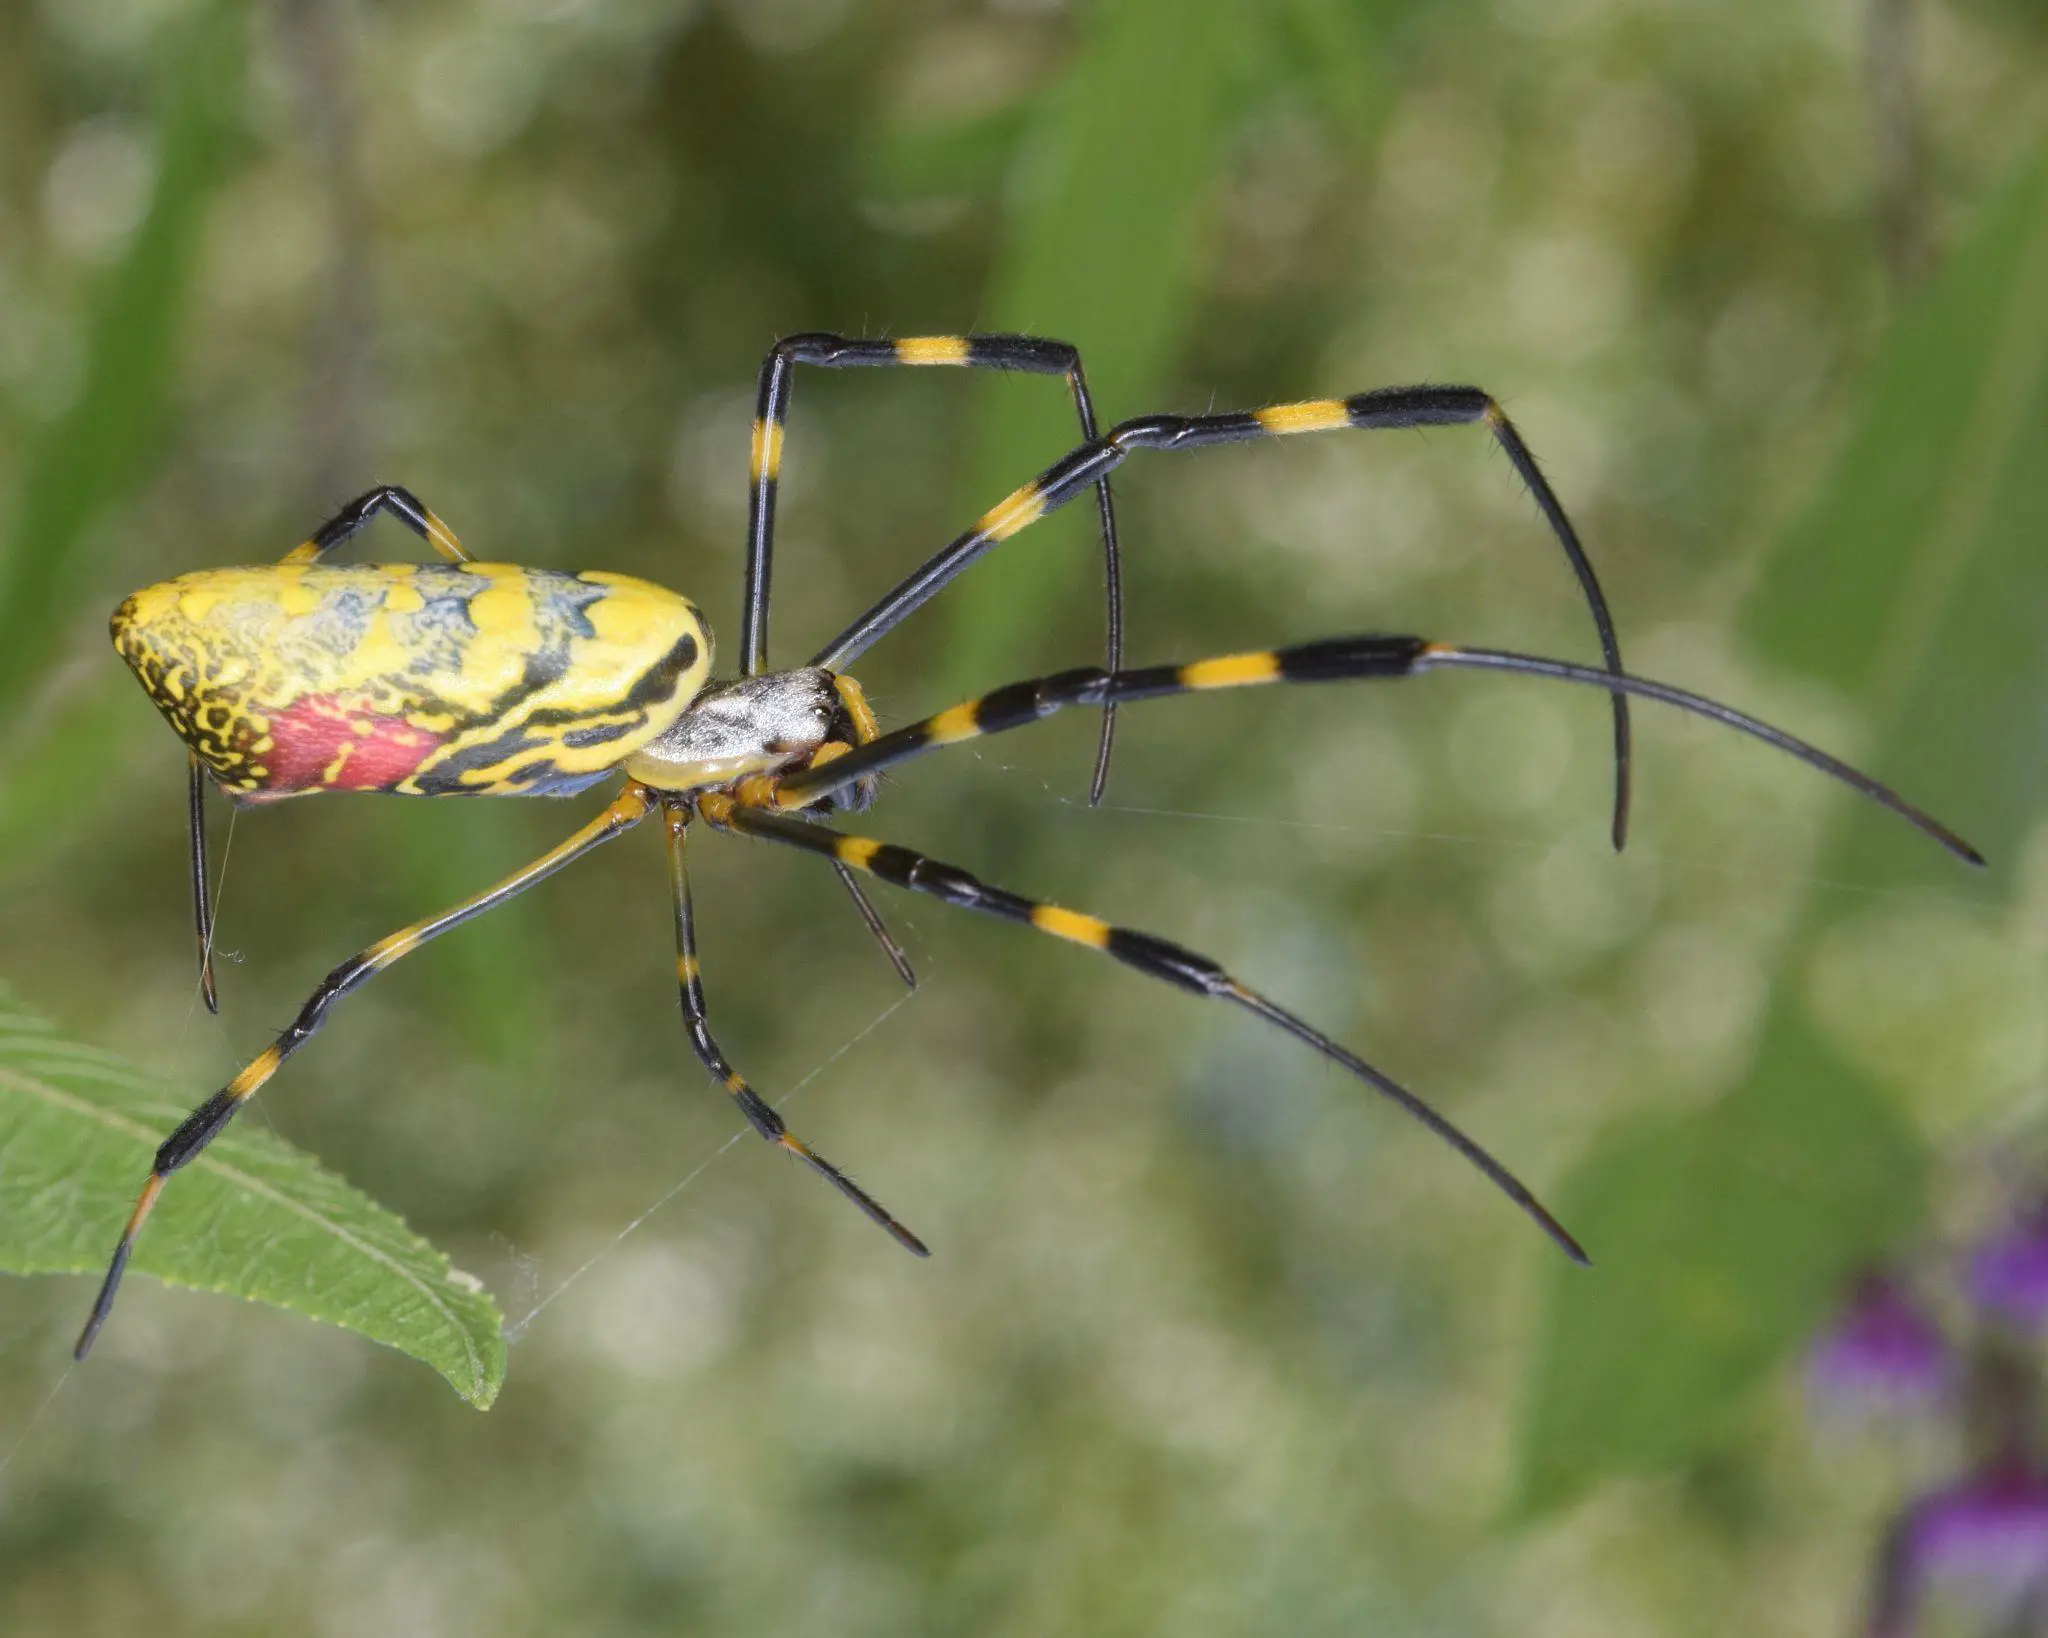 Does Japan have Native spiders?